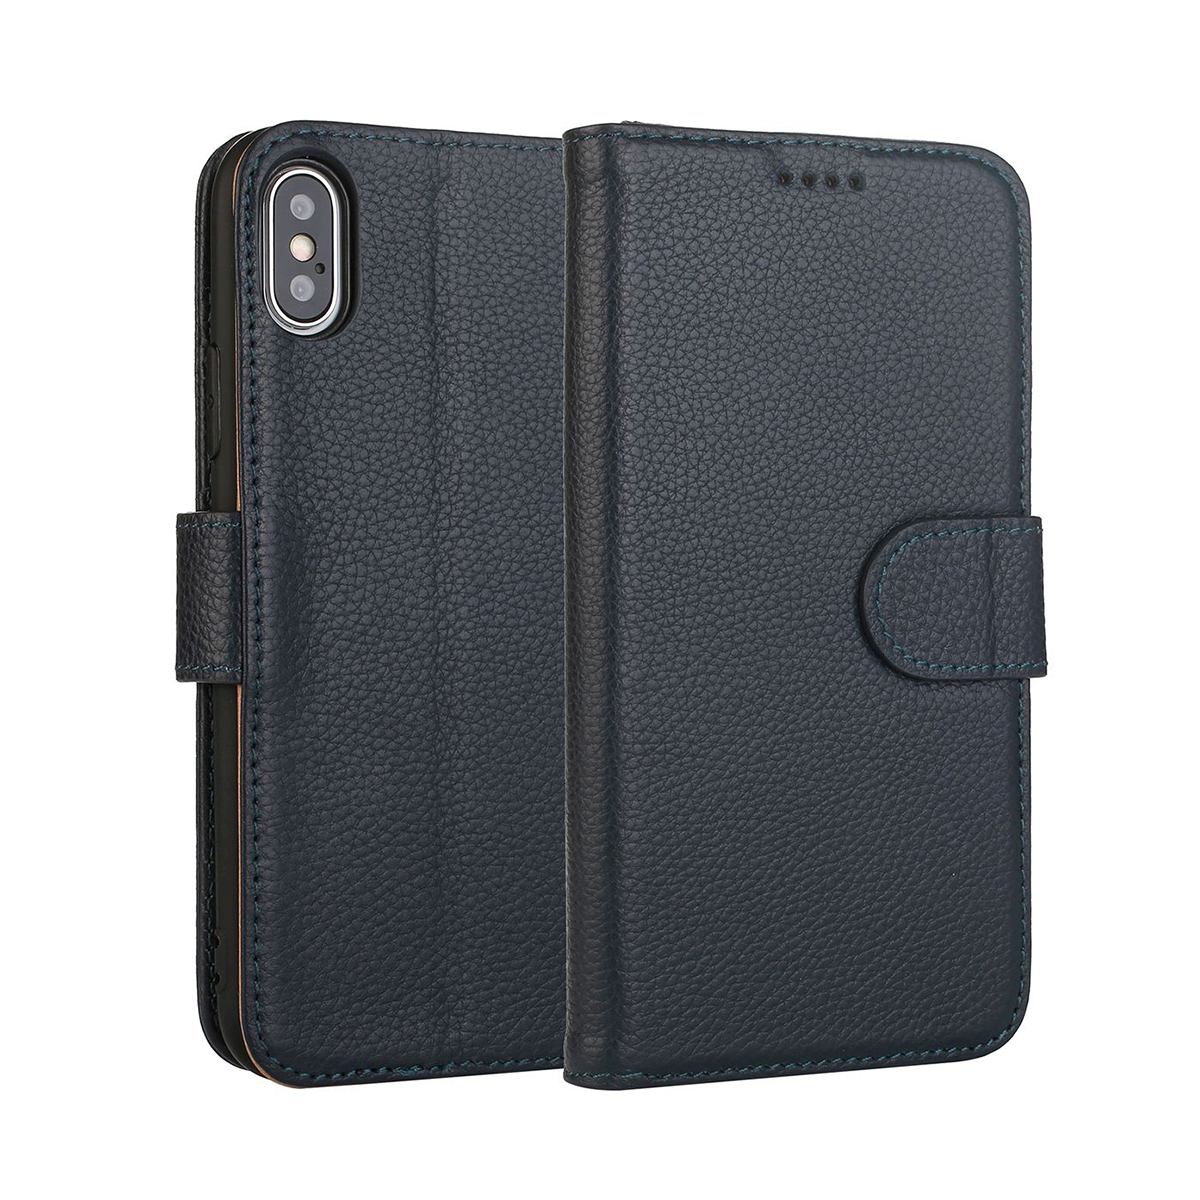 Fashion Navy Cowhide Genuine Leather Wallet For iPhone XS MAX Case